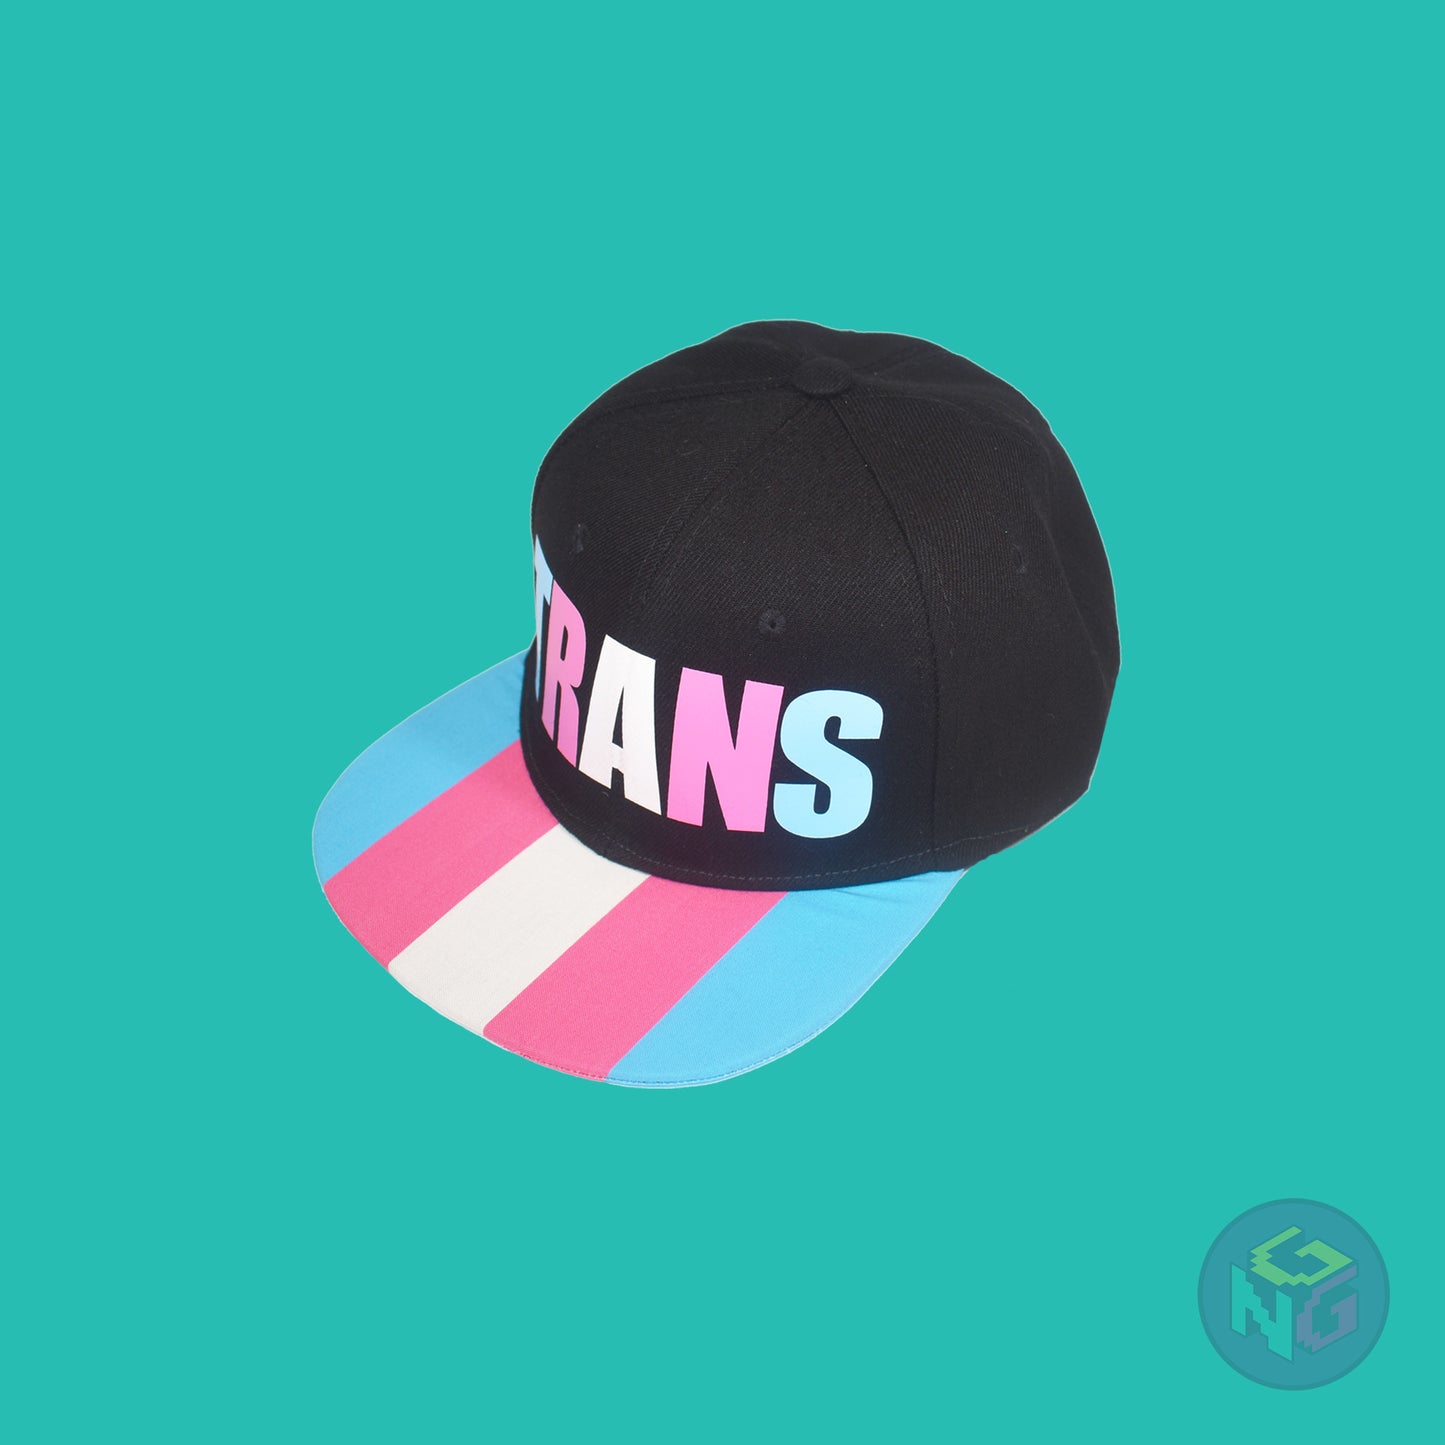 Black flat bill snapback hat. The brim has the transgender pride flag on both sides and the front of the hat has the word “TRANS” in blue, pink, and white letters. Front left view